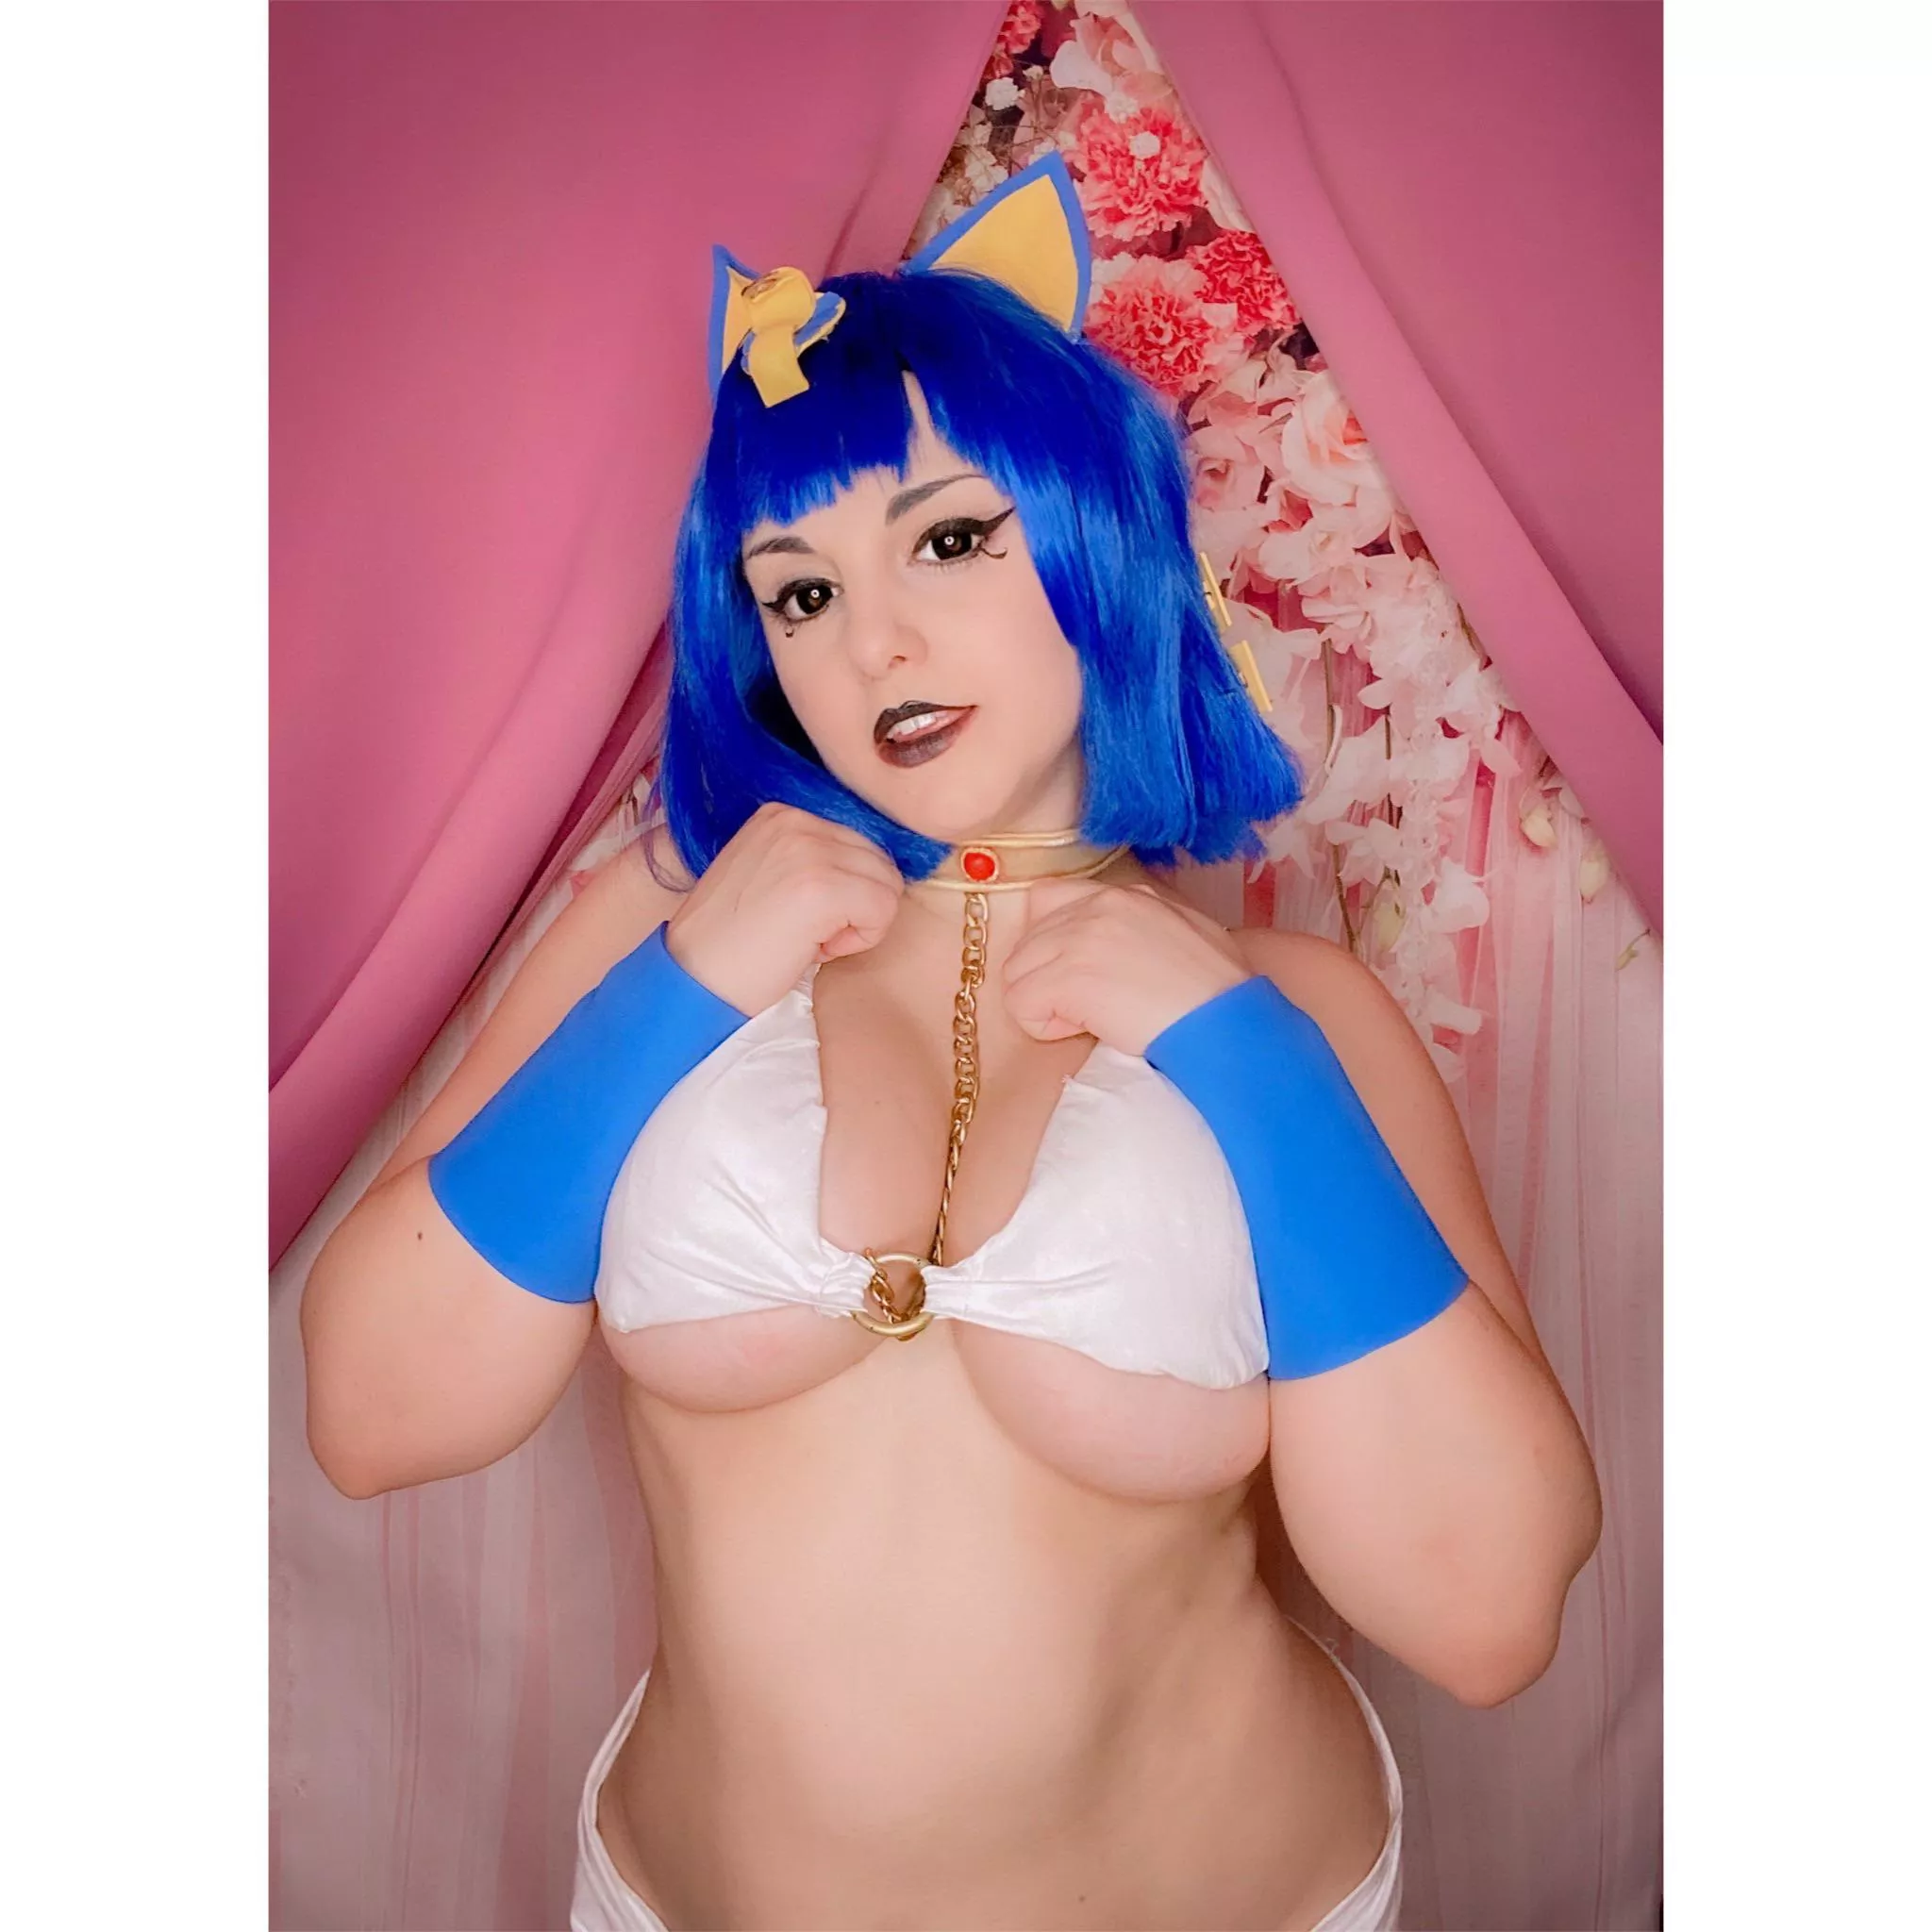 Boobs nude cosplay How to